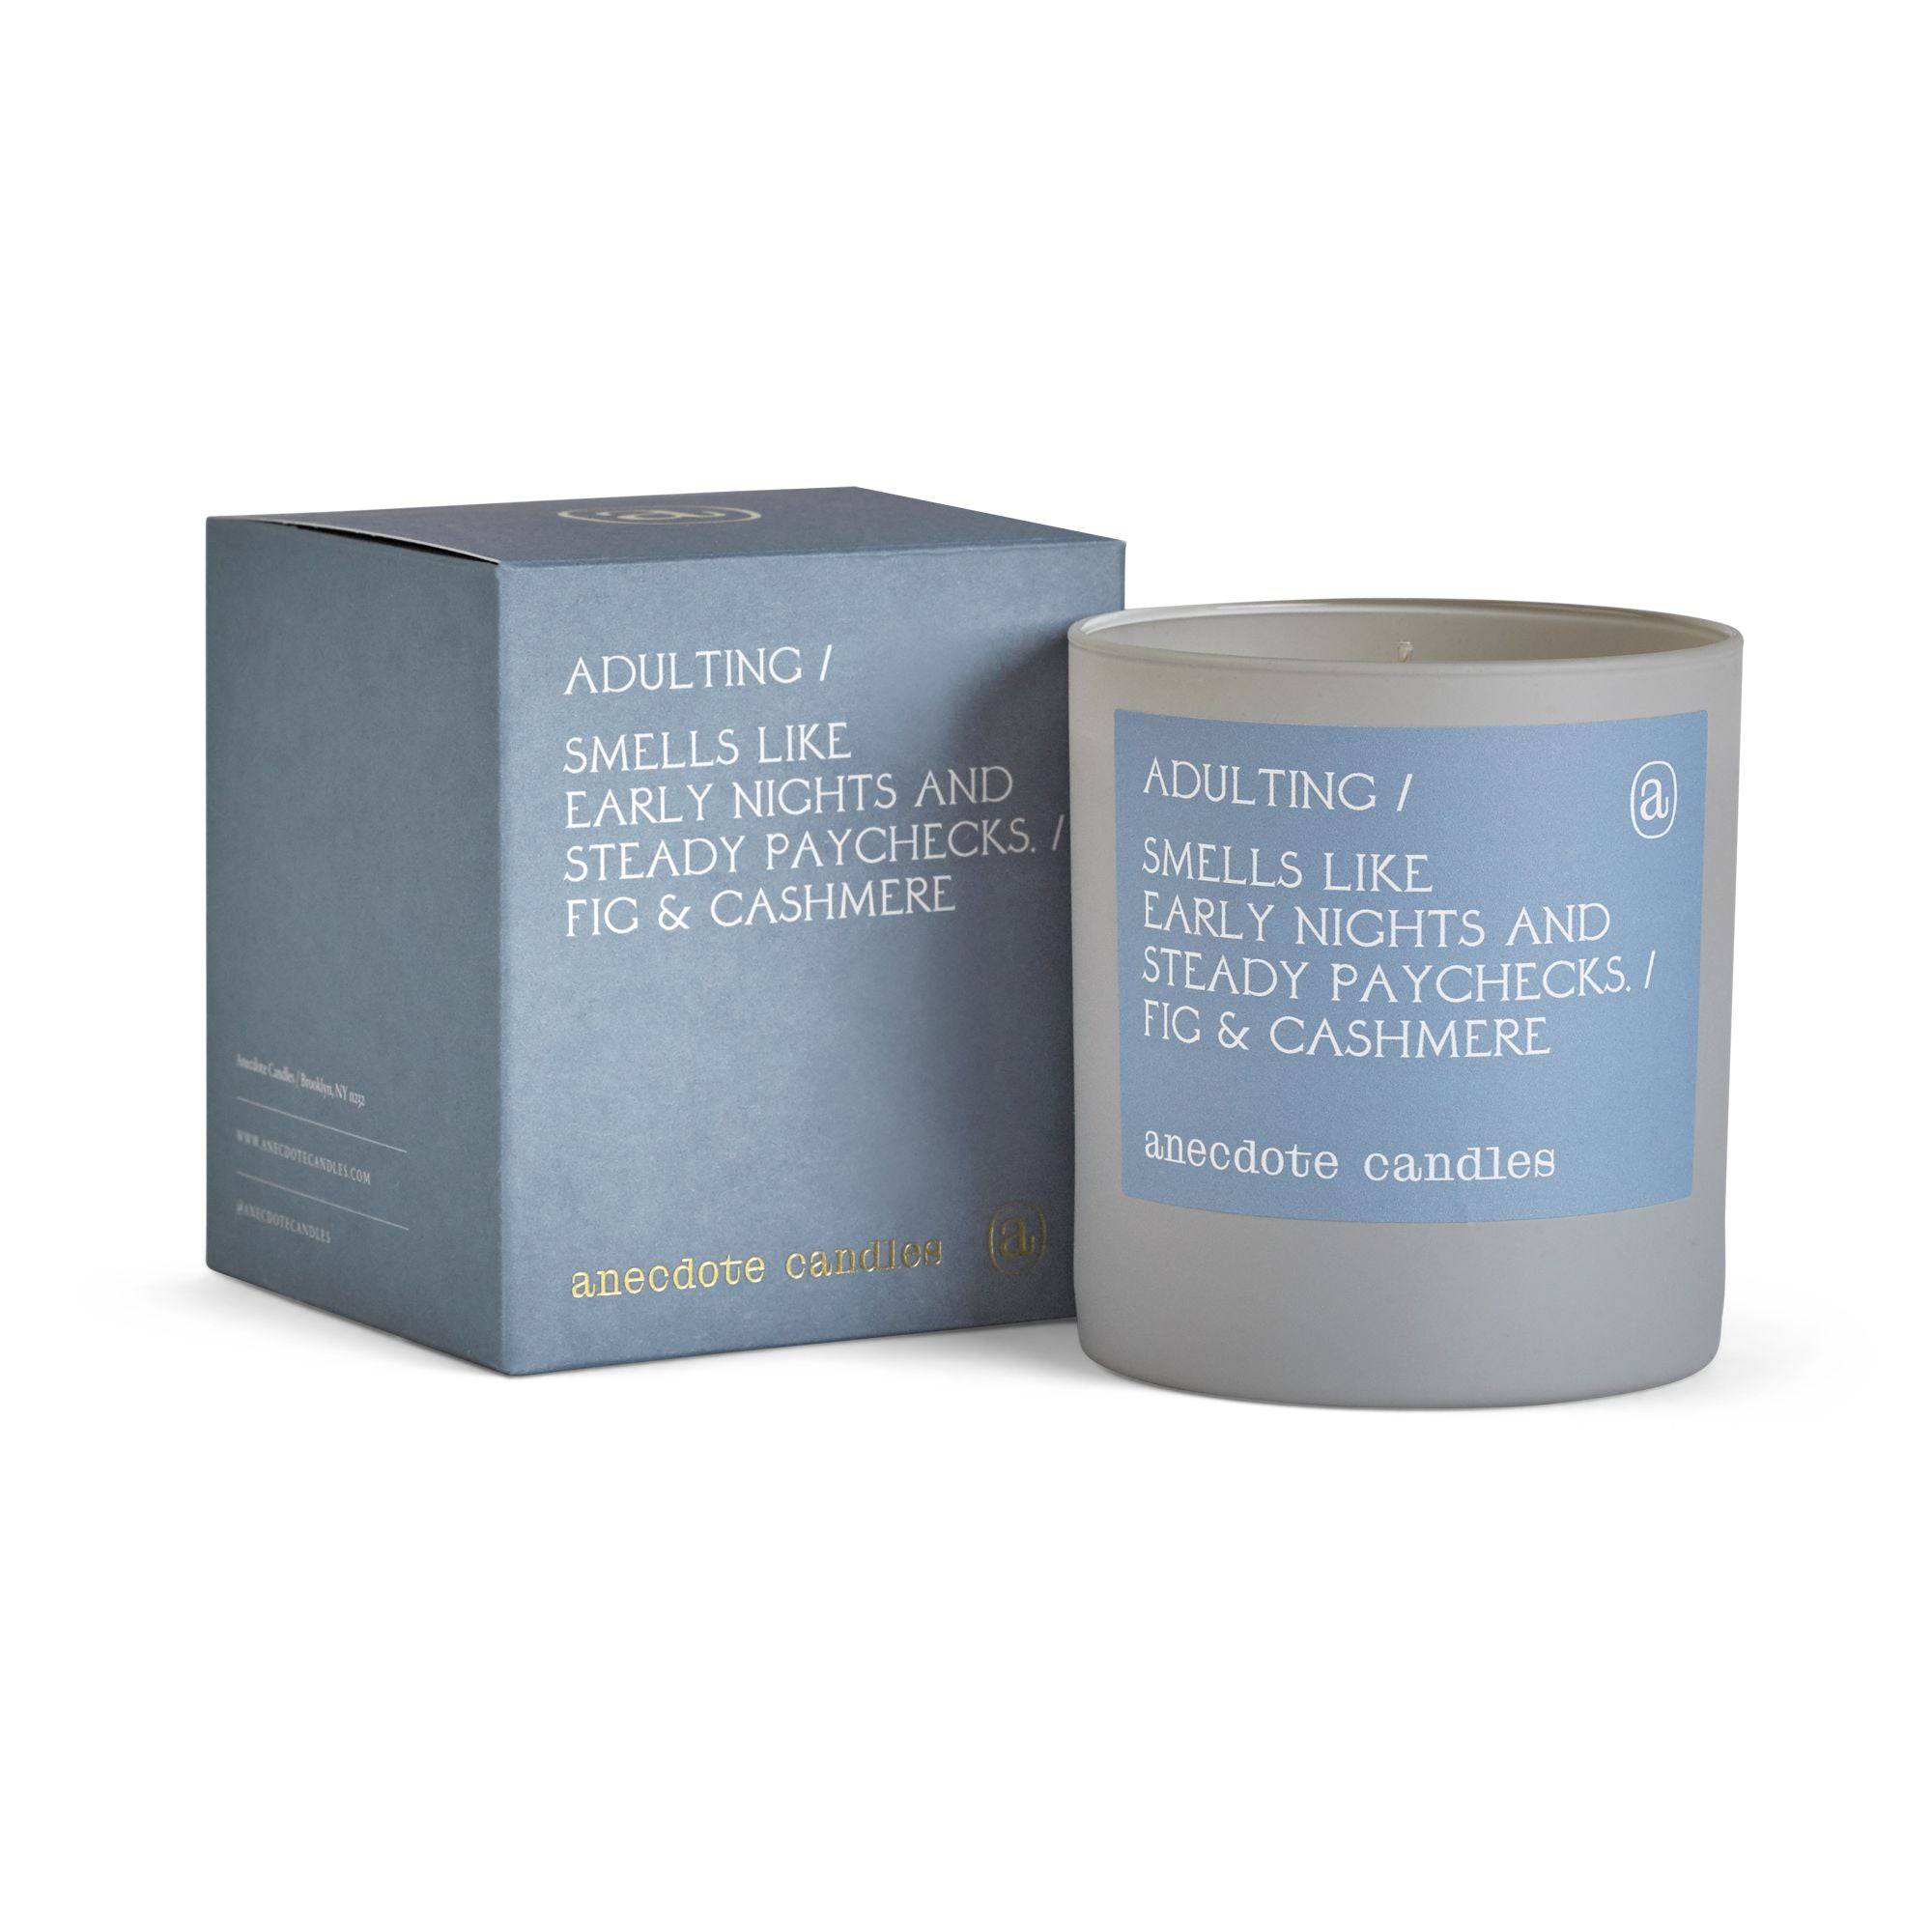 Adulting (Fig & Cashmere) Candle: 9 oz boxed vessel - The Preppy Bunny